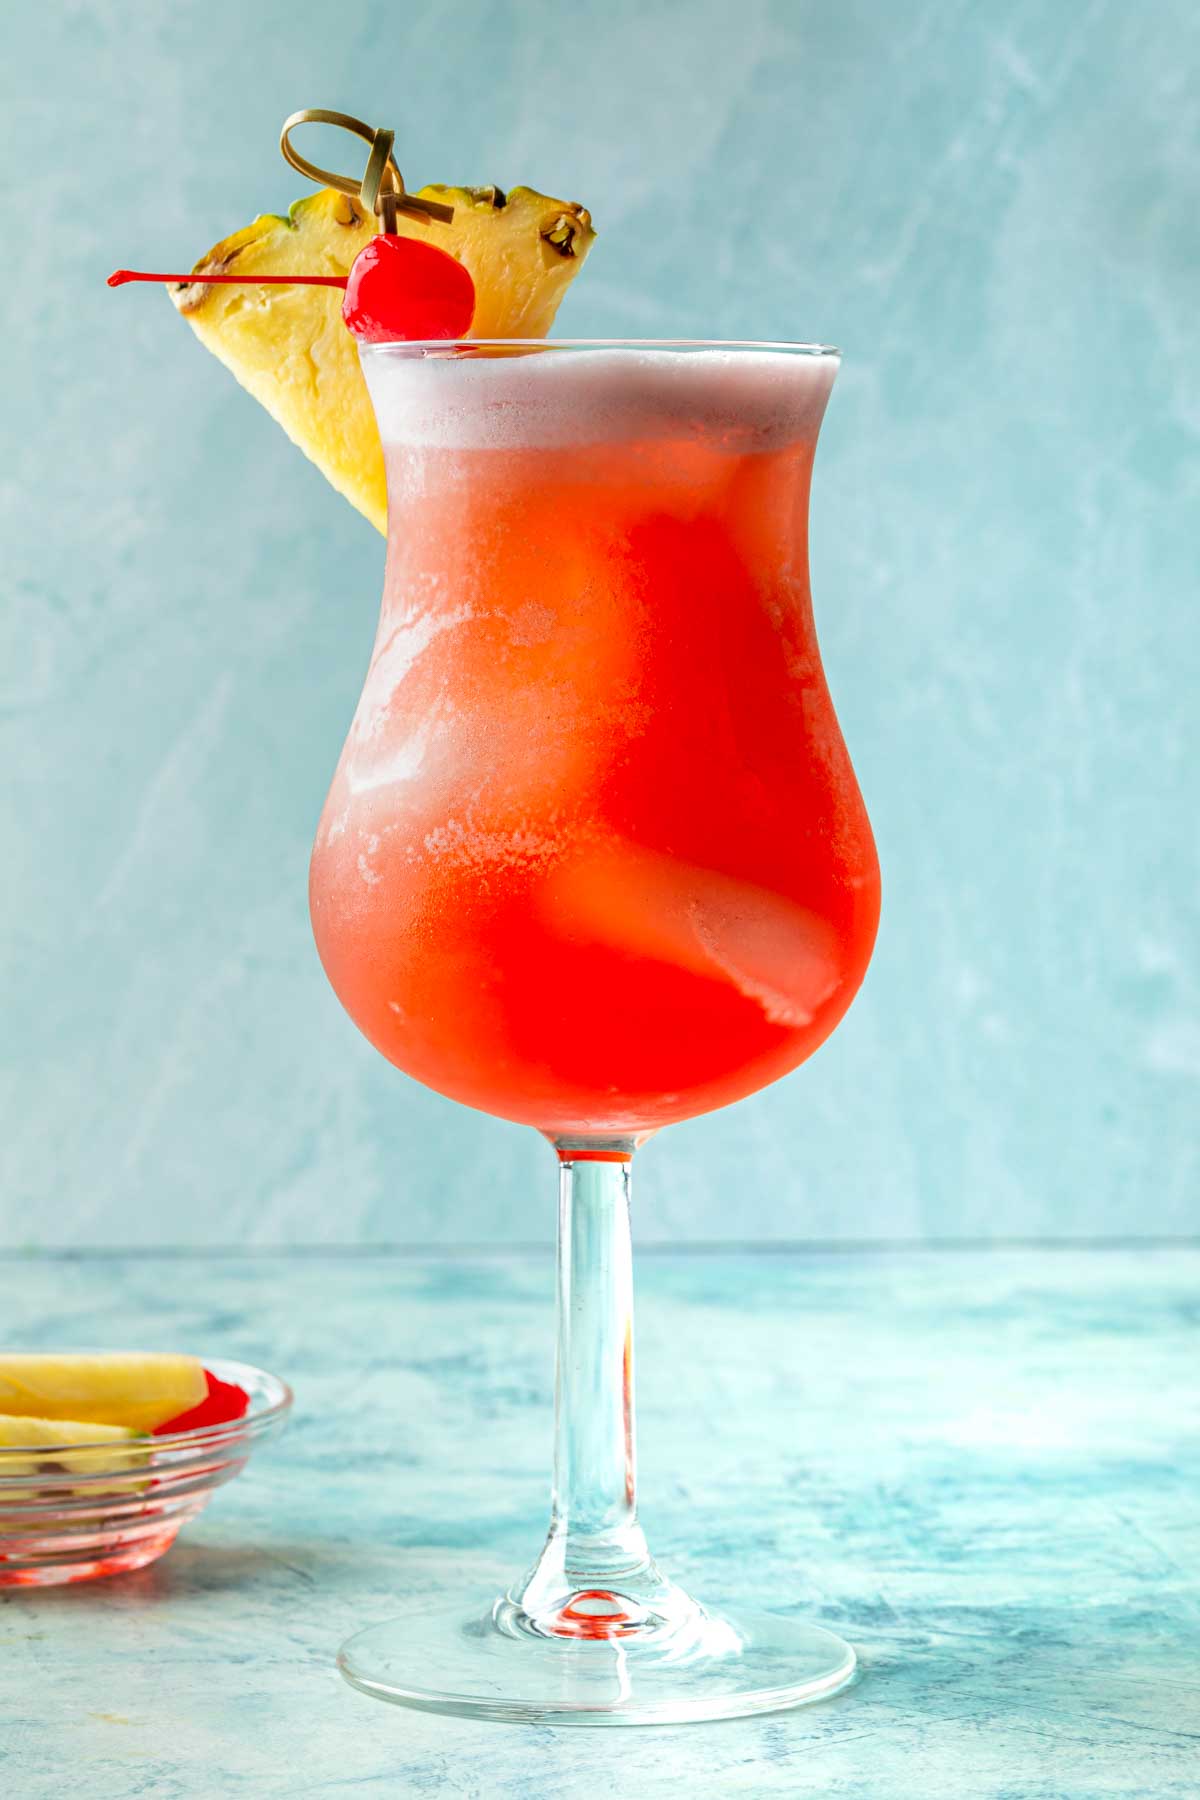 A malibu bay breeze in a tropical cocktail glass, garnished with a pineapple wedge and a maraschino cherry. 